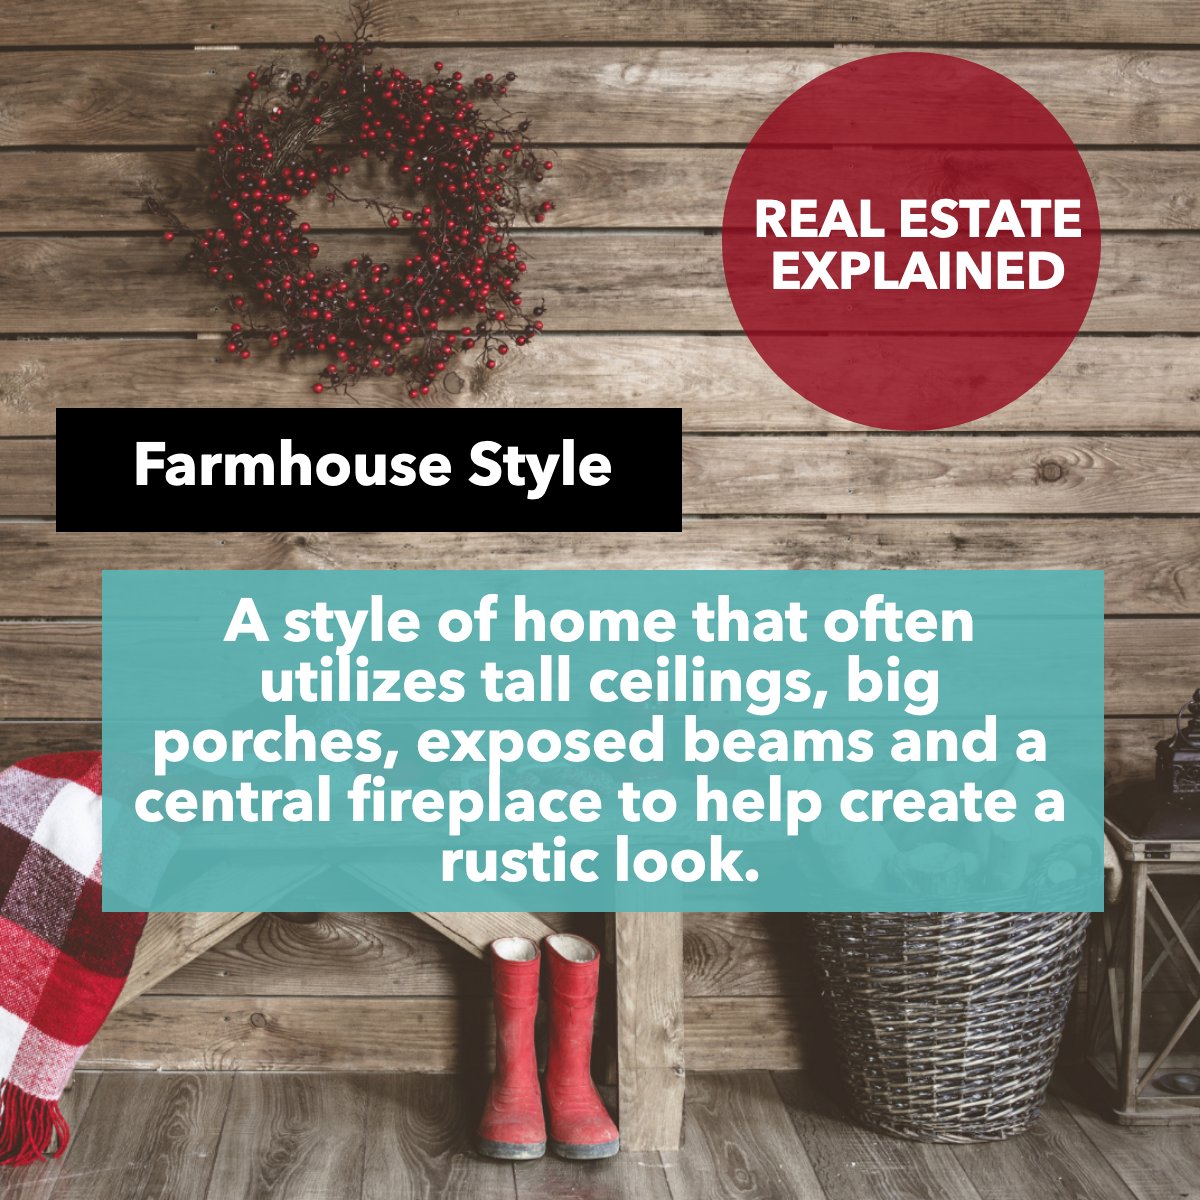 Did you know 🤔 what a Farmhouse Style is 🏡

Is this the type of house that you like

#farmhousestylehome #farmhousestyledesign #farmhousestyleinspired #farmhouseismystyle
#rayshomeguide